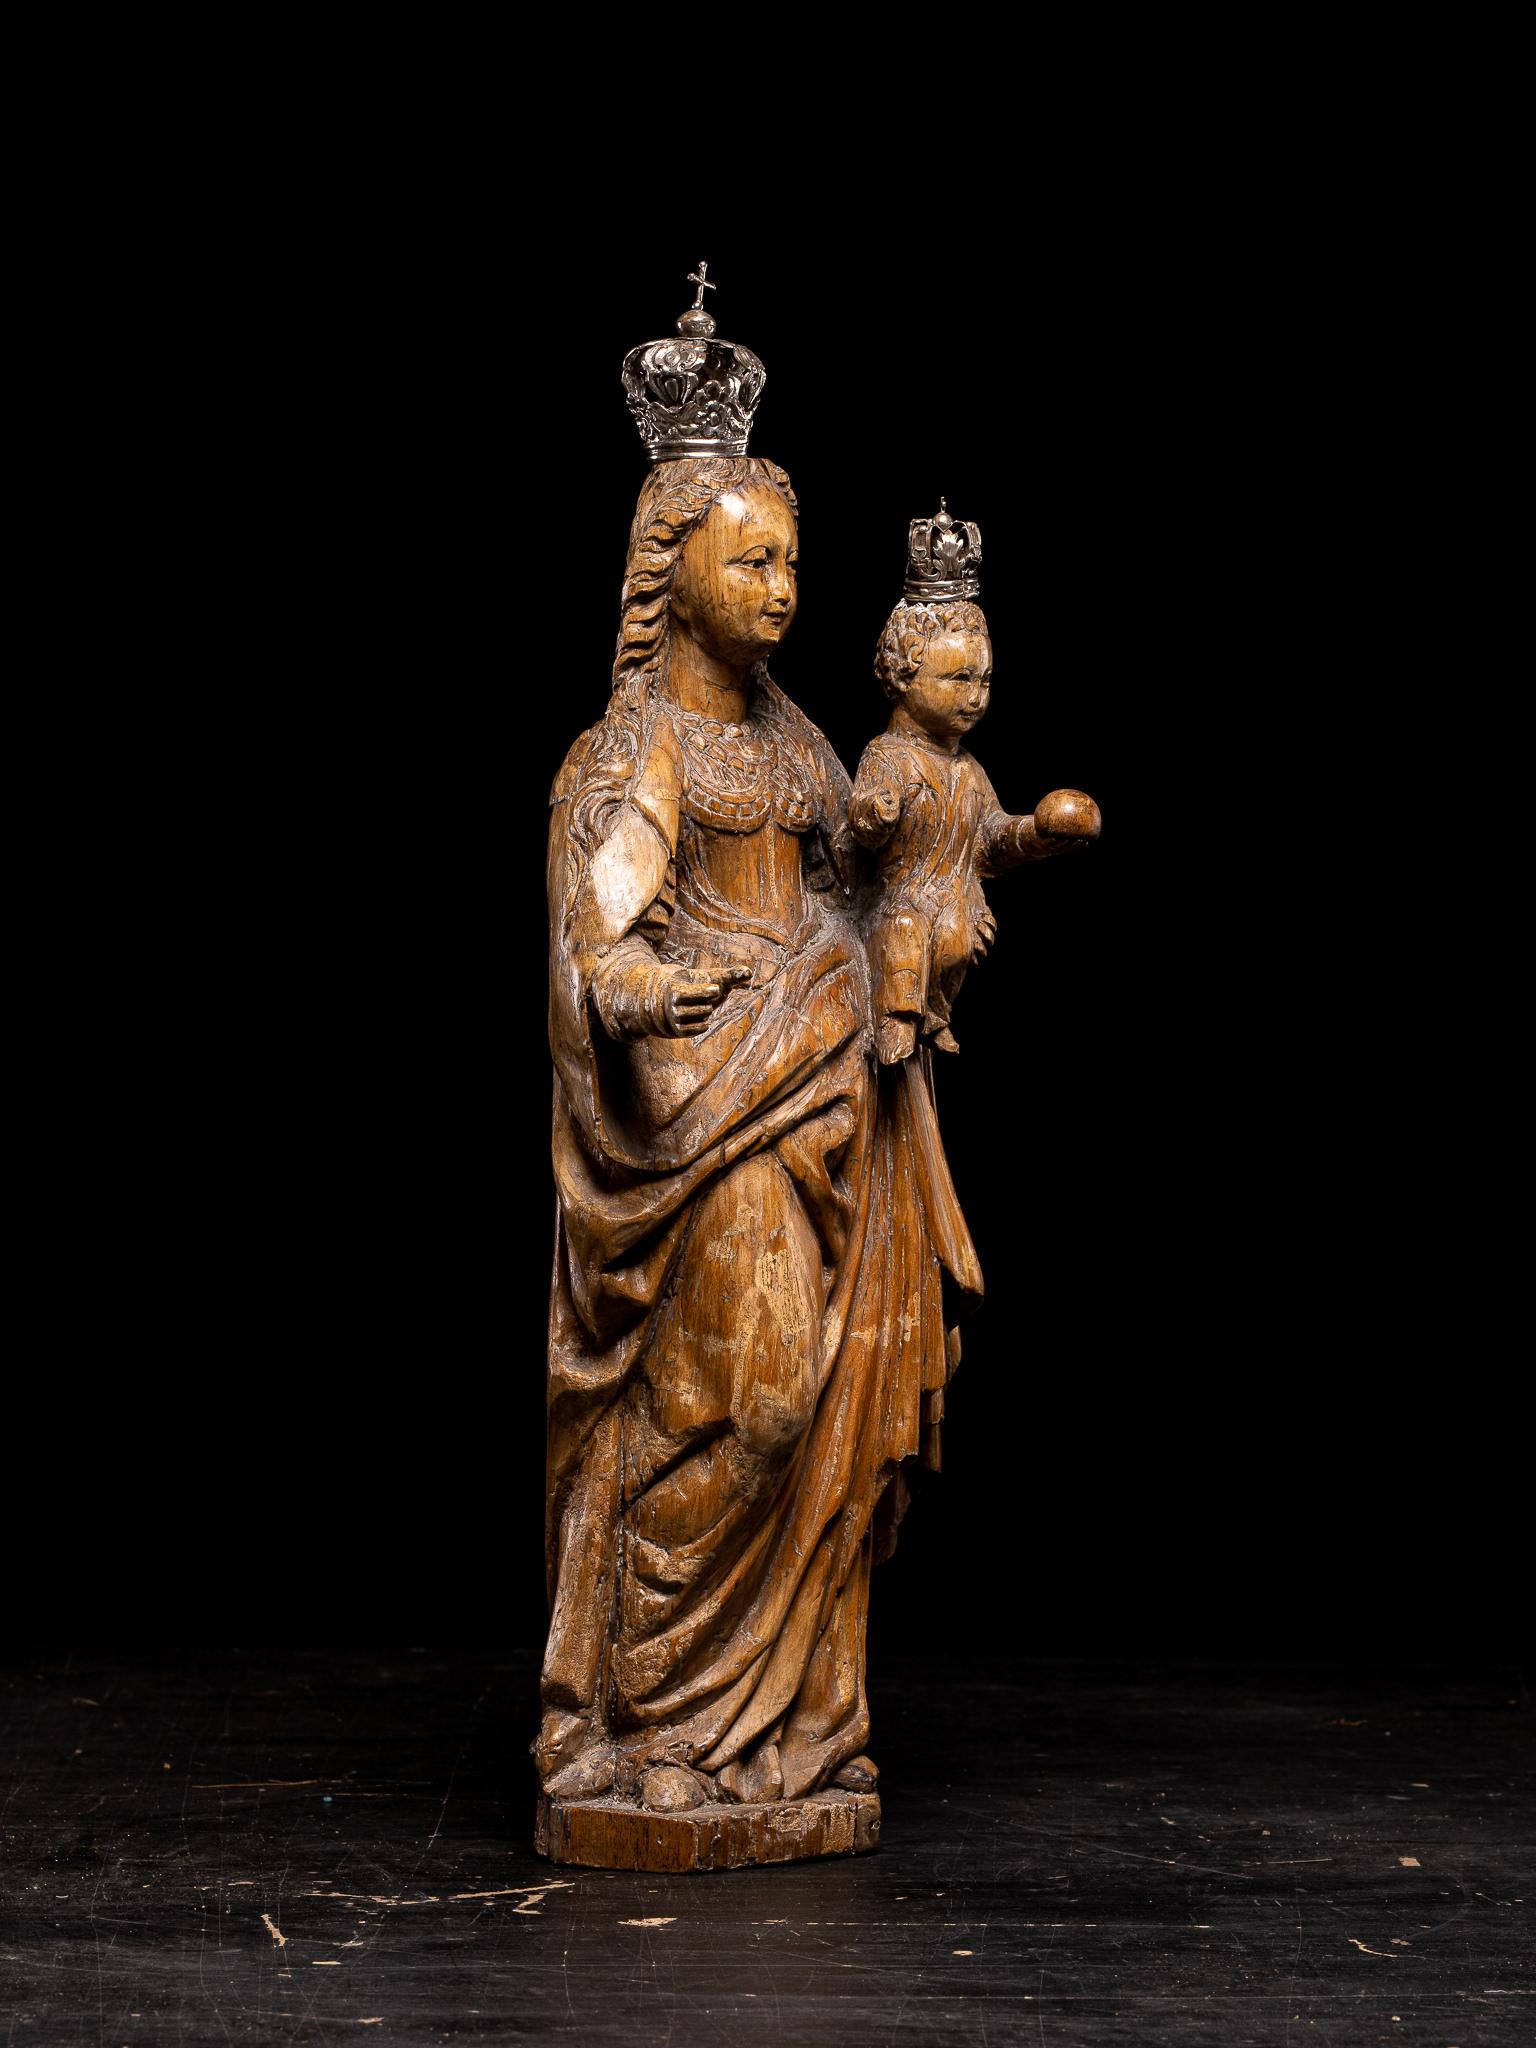 Mechelen dolls are rare wooden devotional figurines (mainly walnut was used), which were made by some members of the Guild of Saint Luke. The figures, all individual saints, were  made from reference models using highly regulated carving and